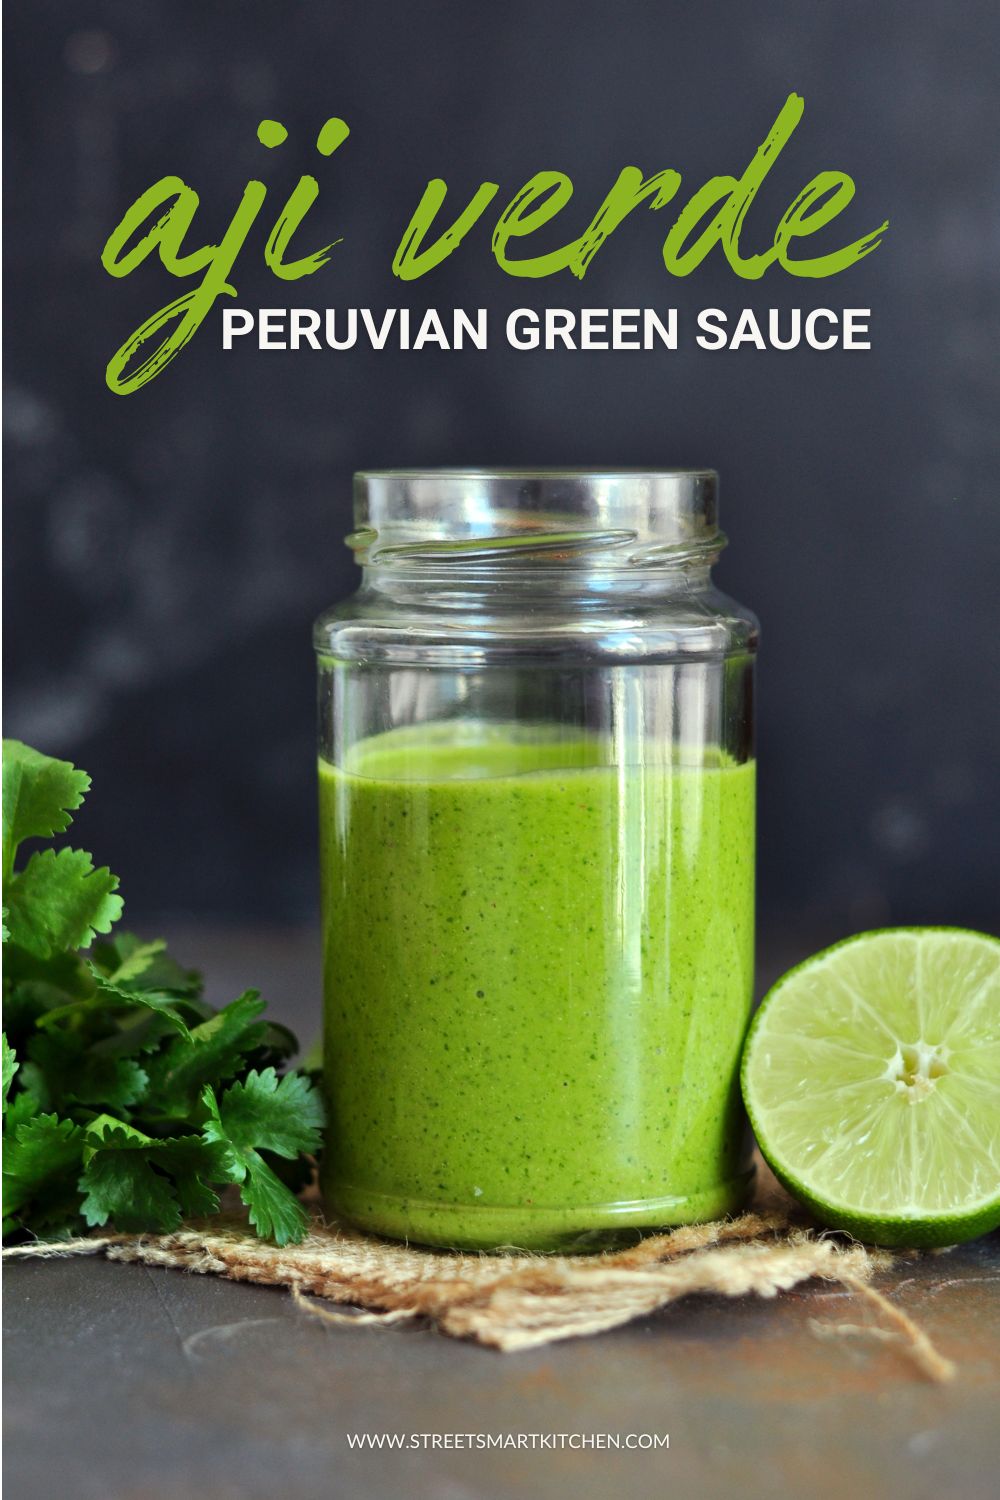 A surprising new take on a Peruvian classic, this brilliant aji verde green sauce will become your new secret superpower in the kitchen.